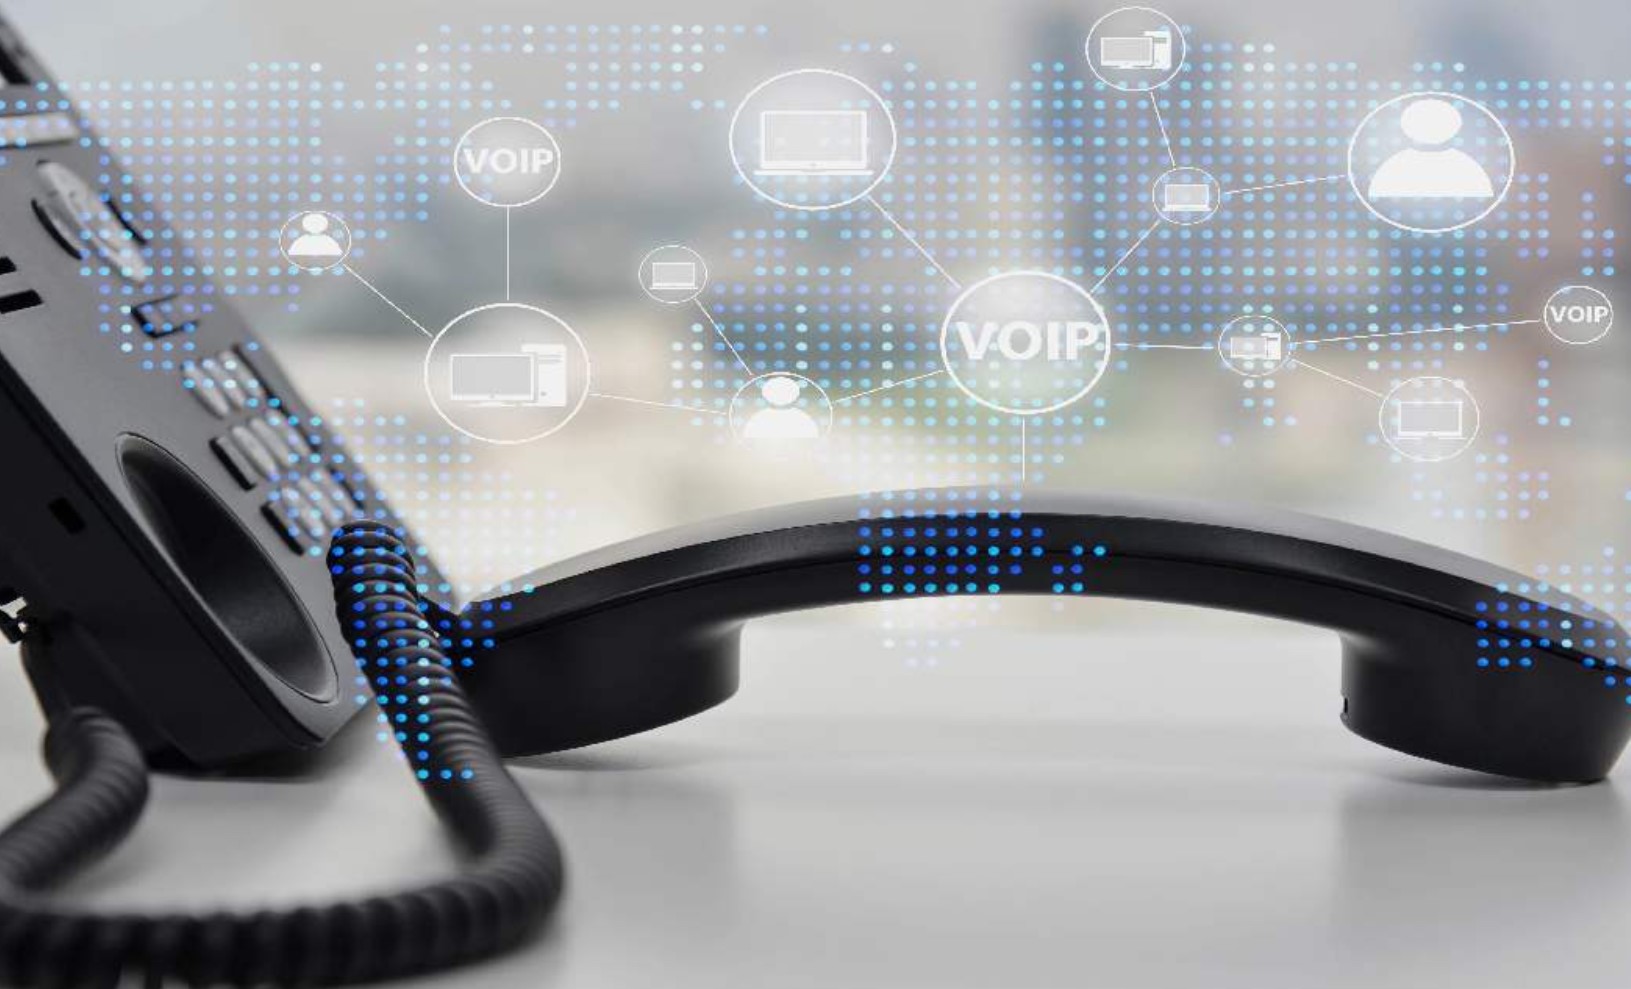 Types of VoIP Phone Systems